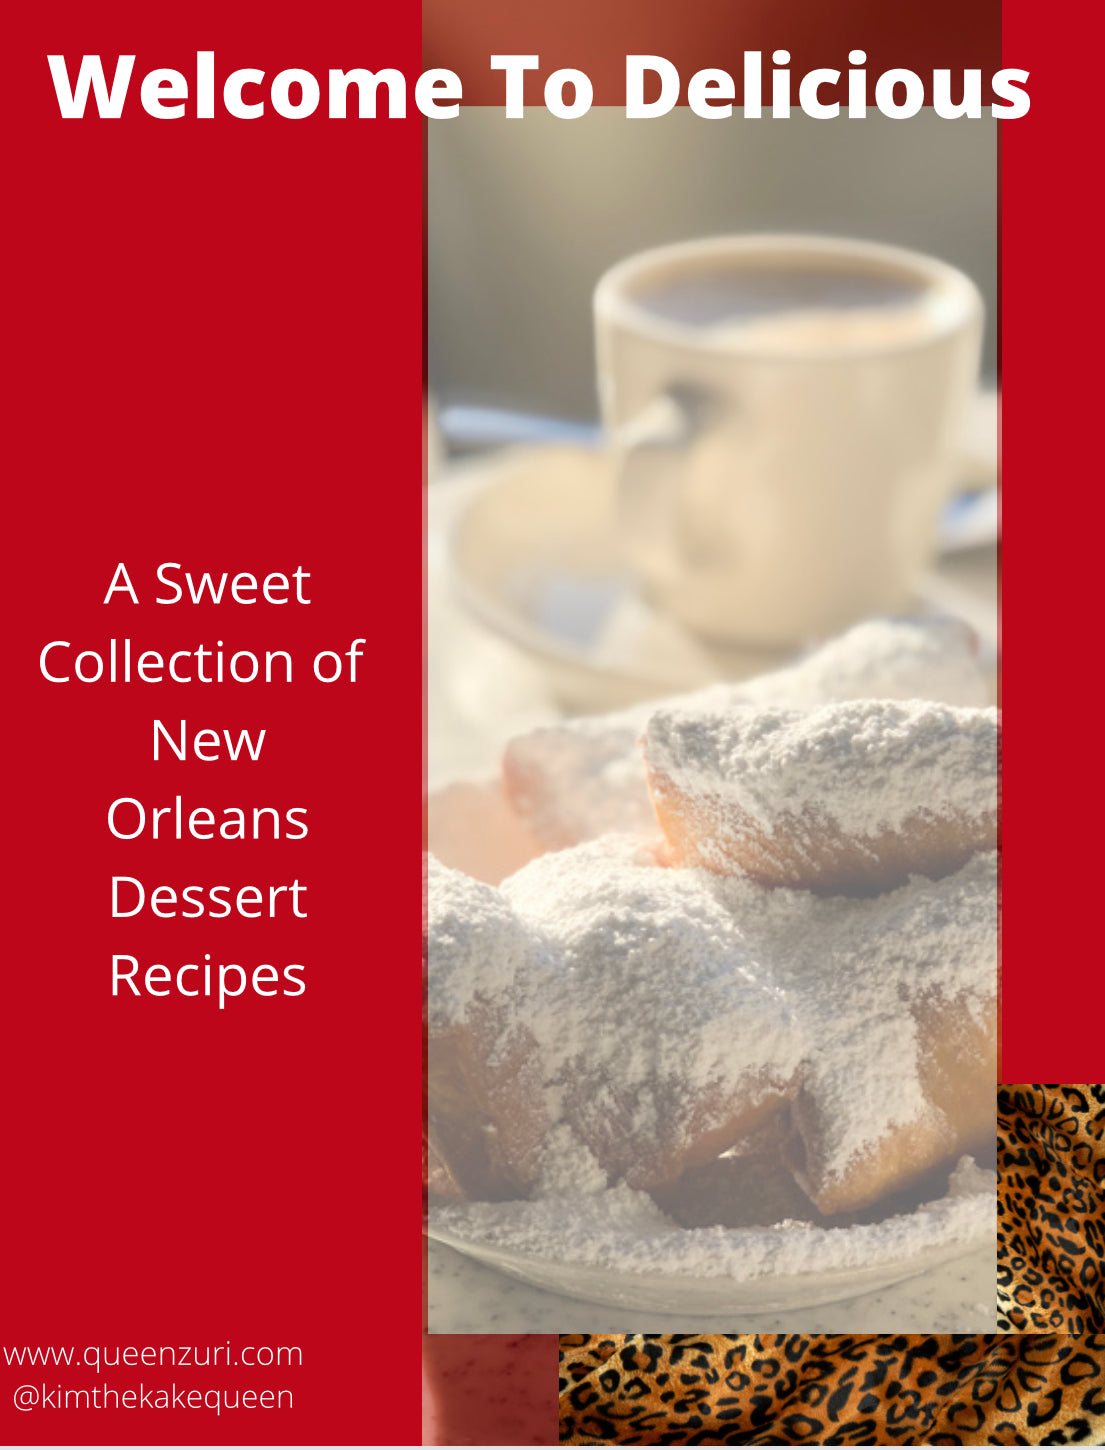 A Sweet Collection off New Orleans Dessert Recipes